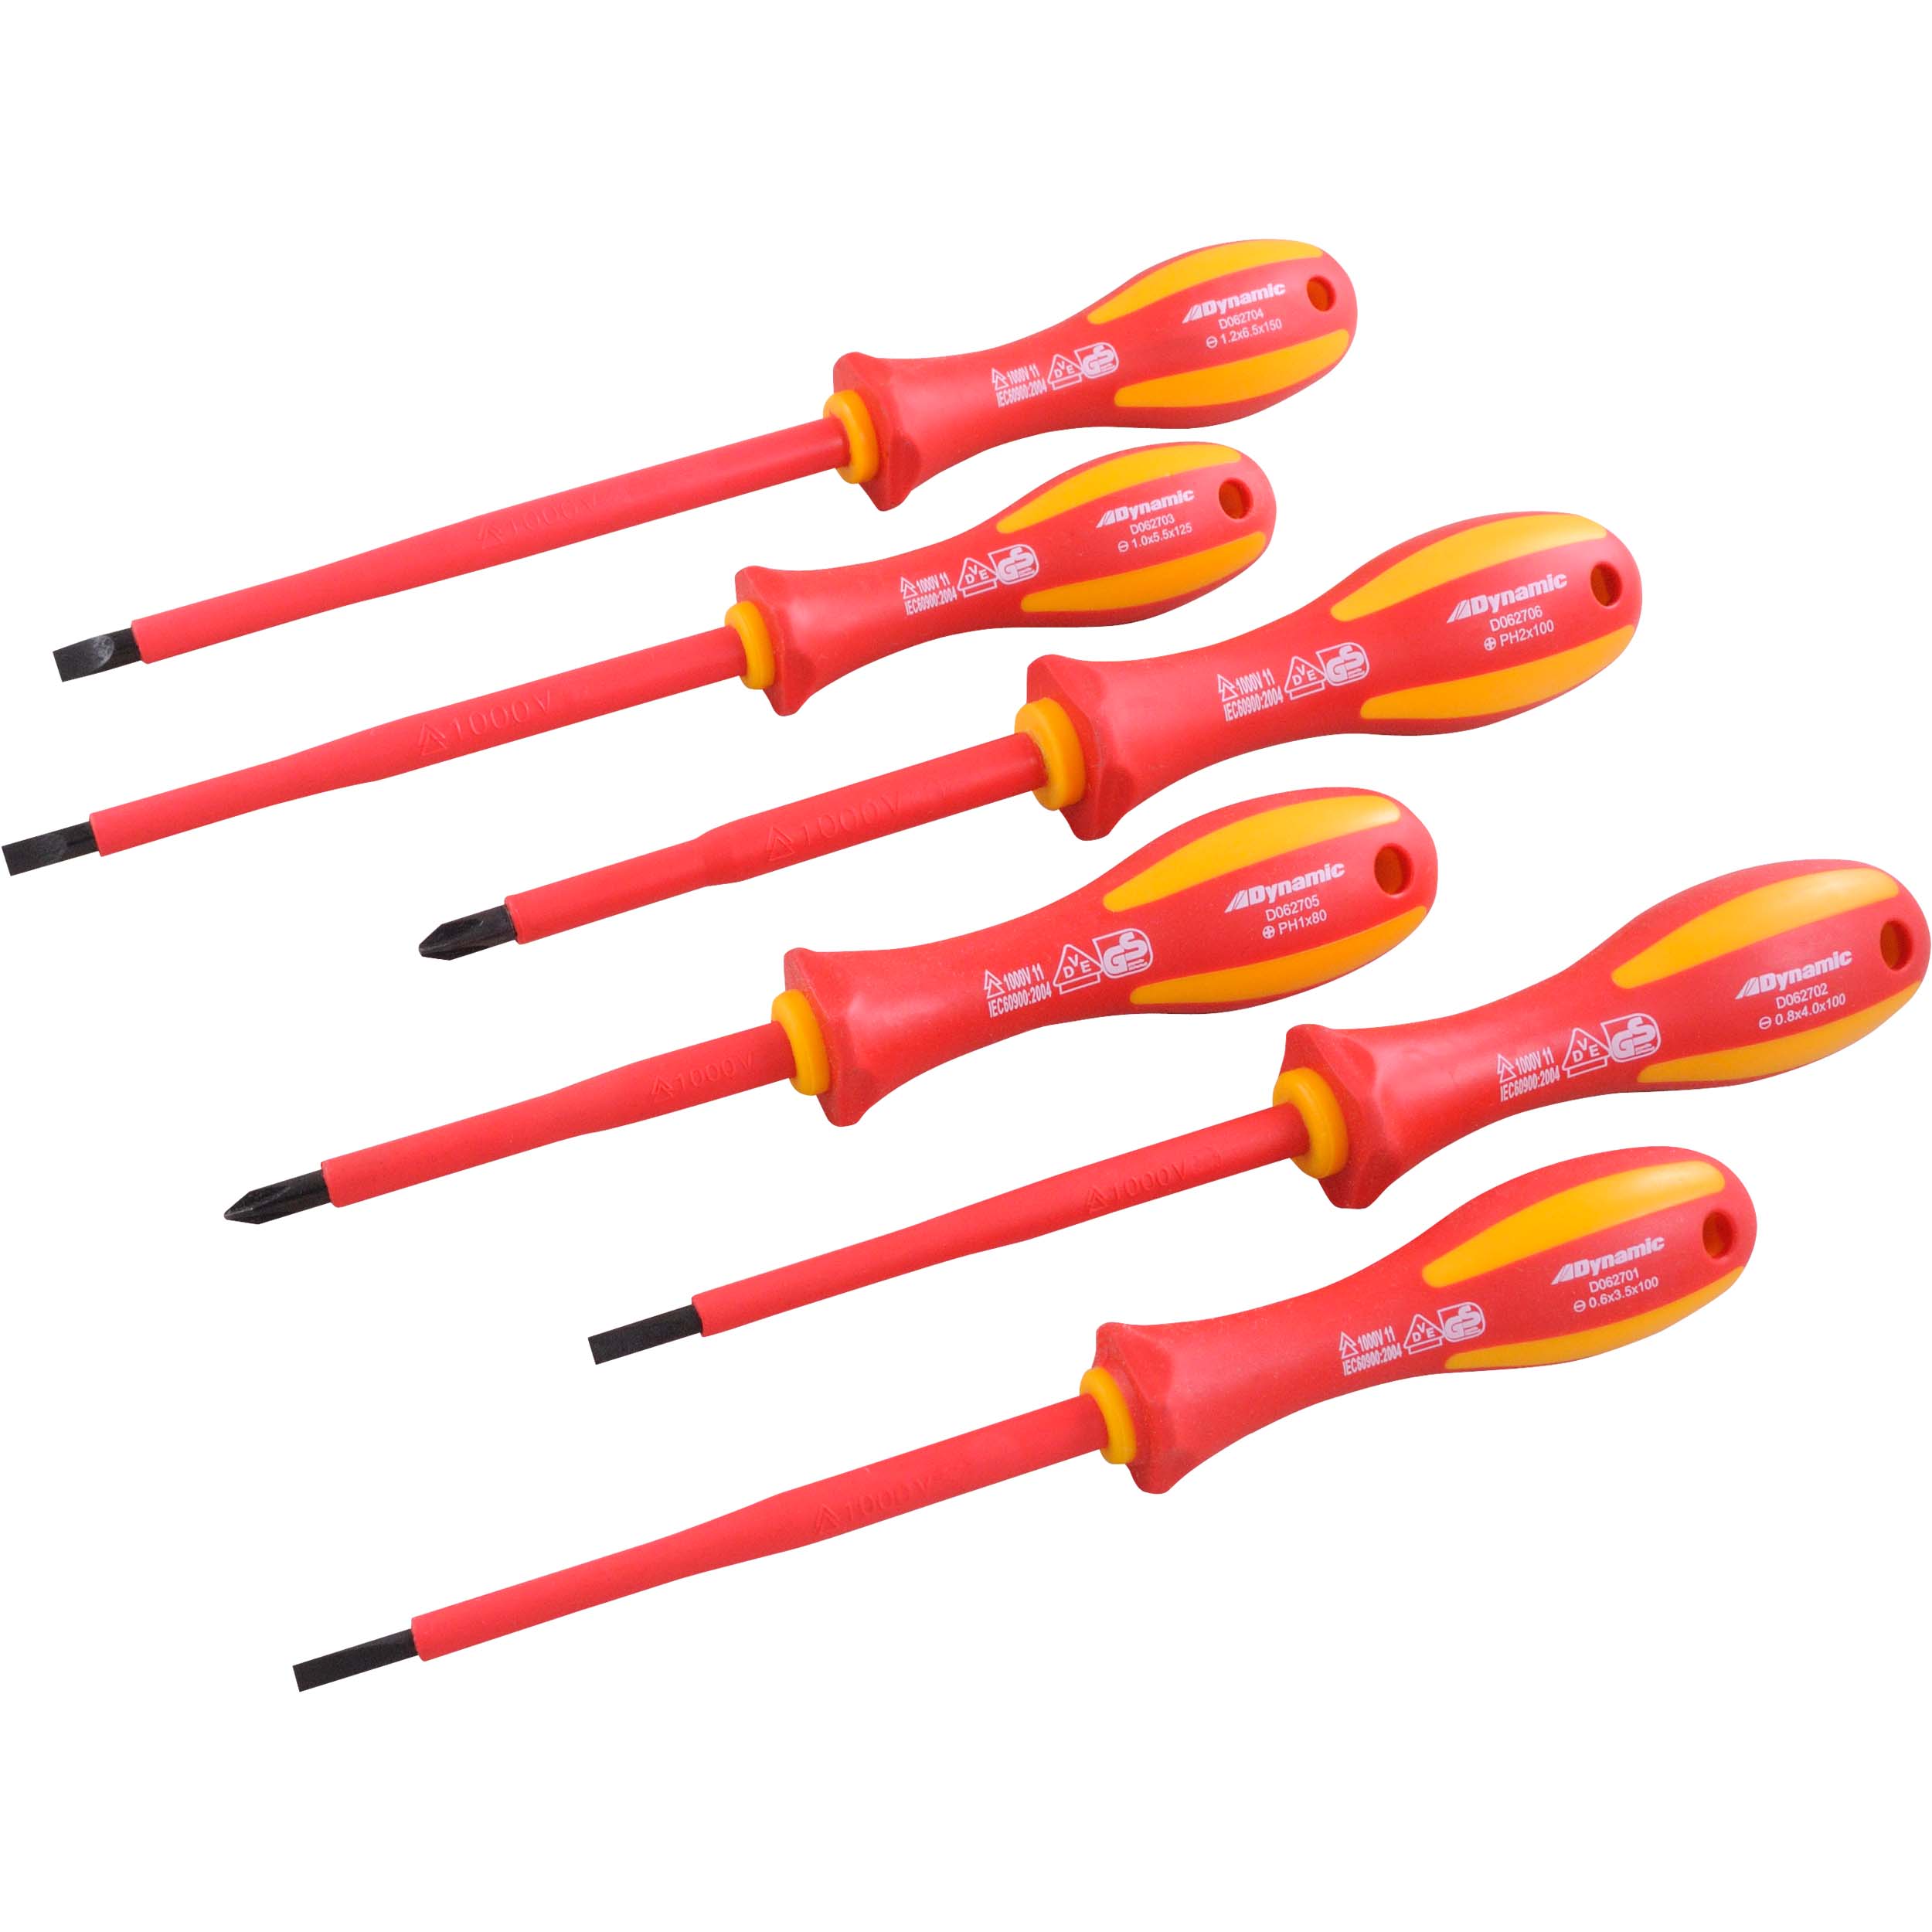 Tools 6pc Insulated Screwdriver Set, Slotted And Phillips